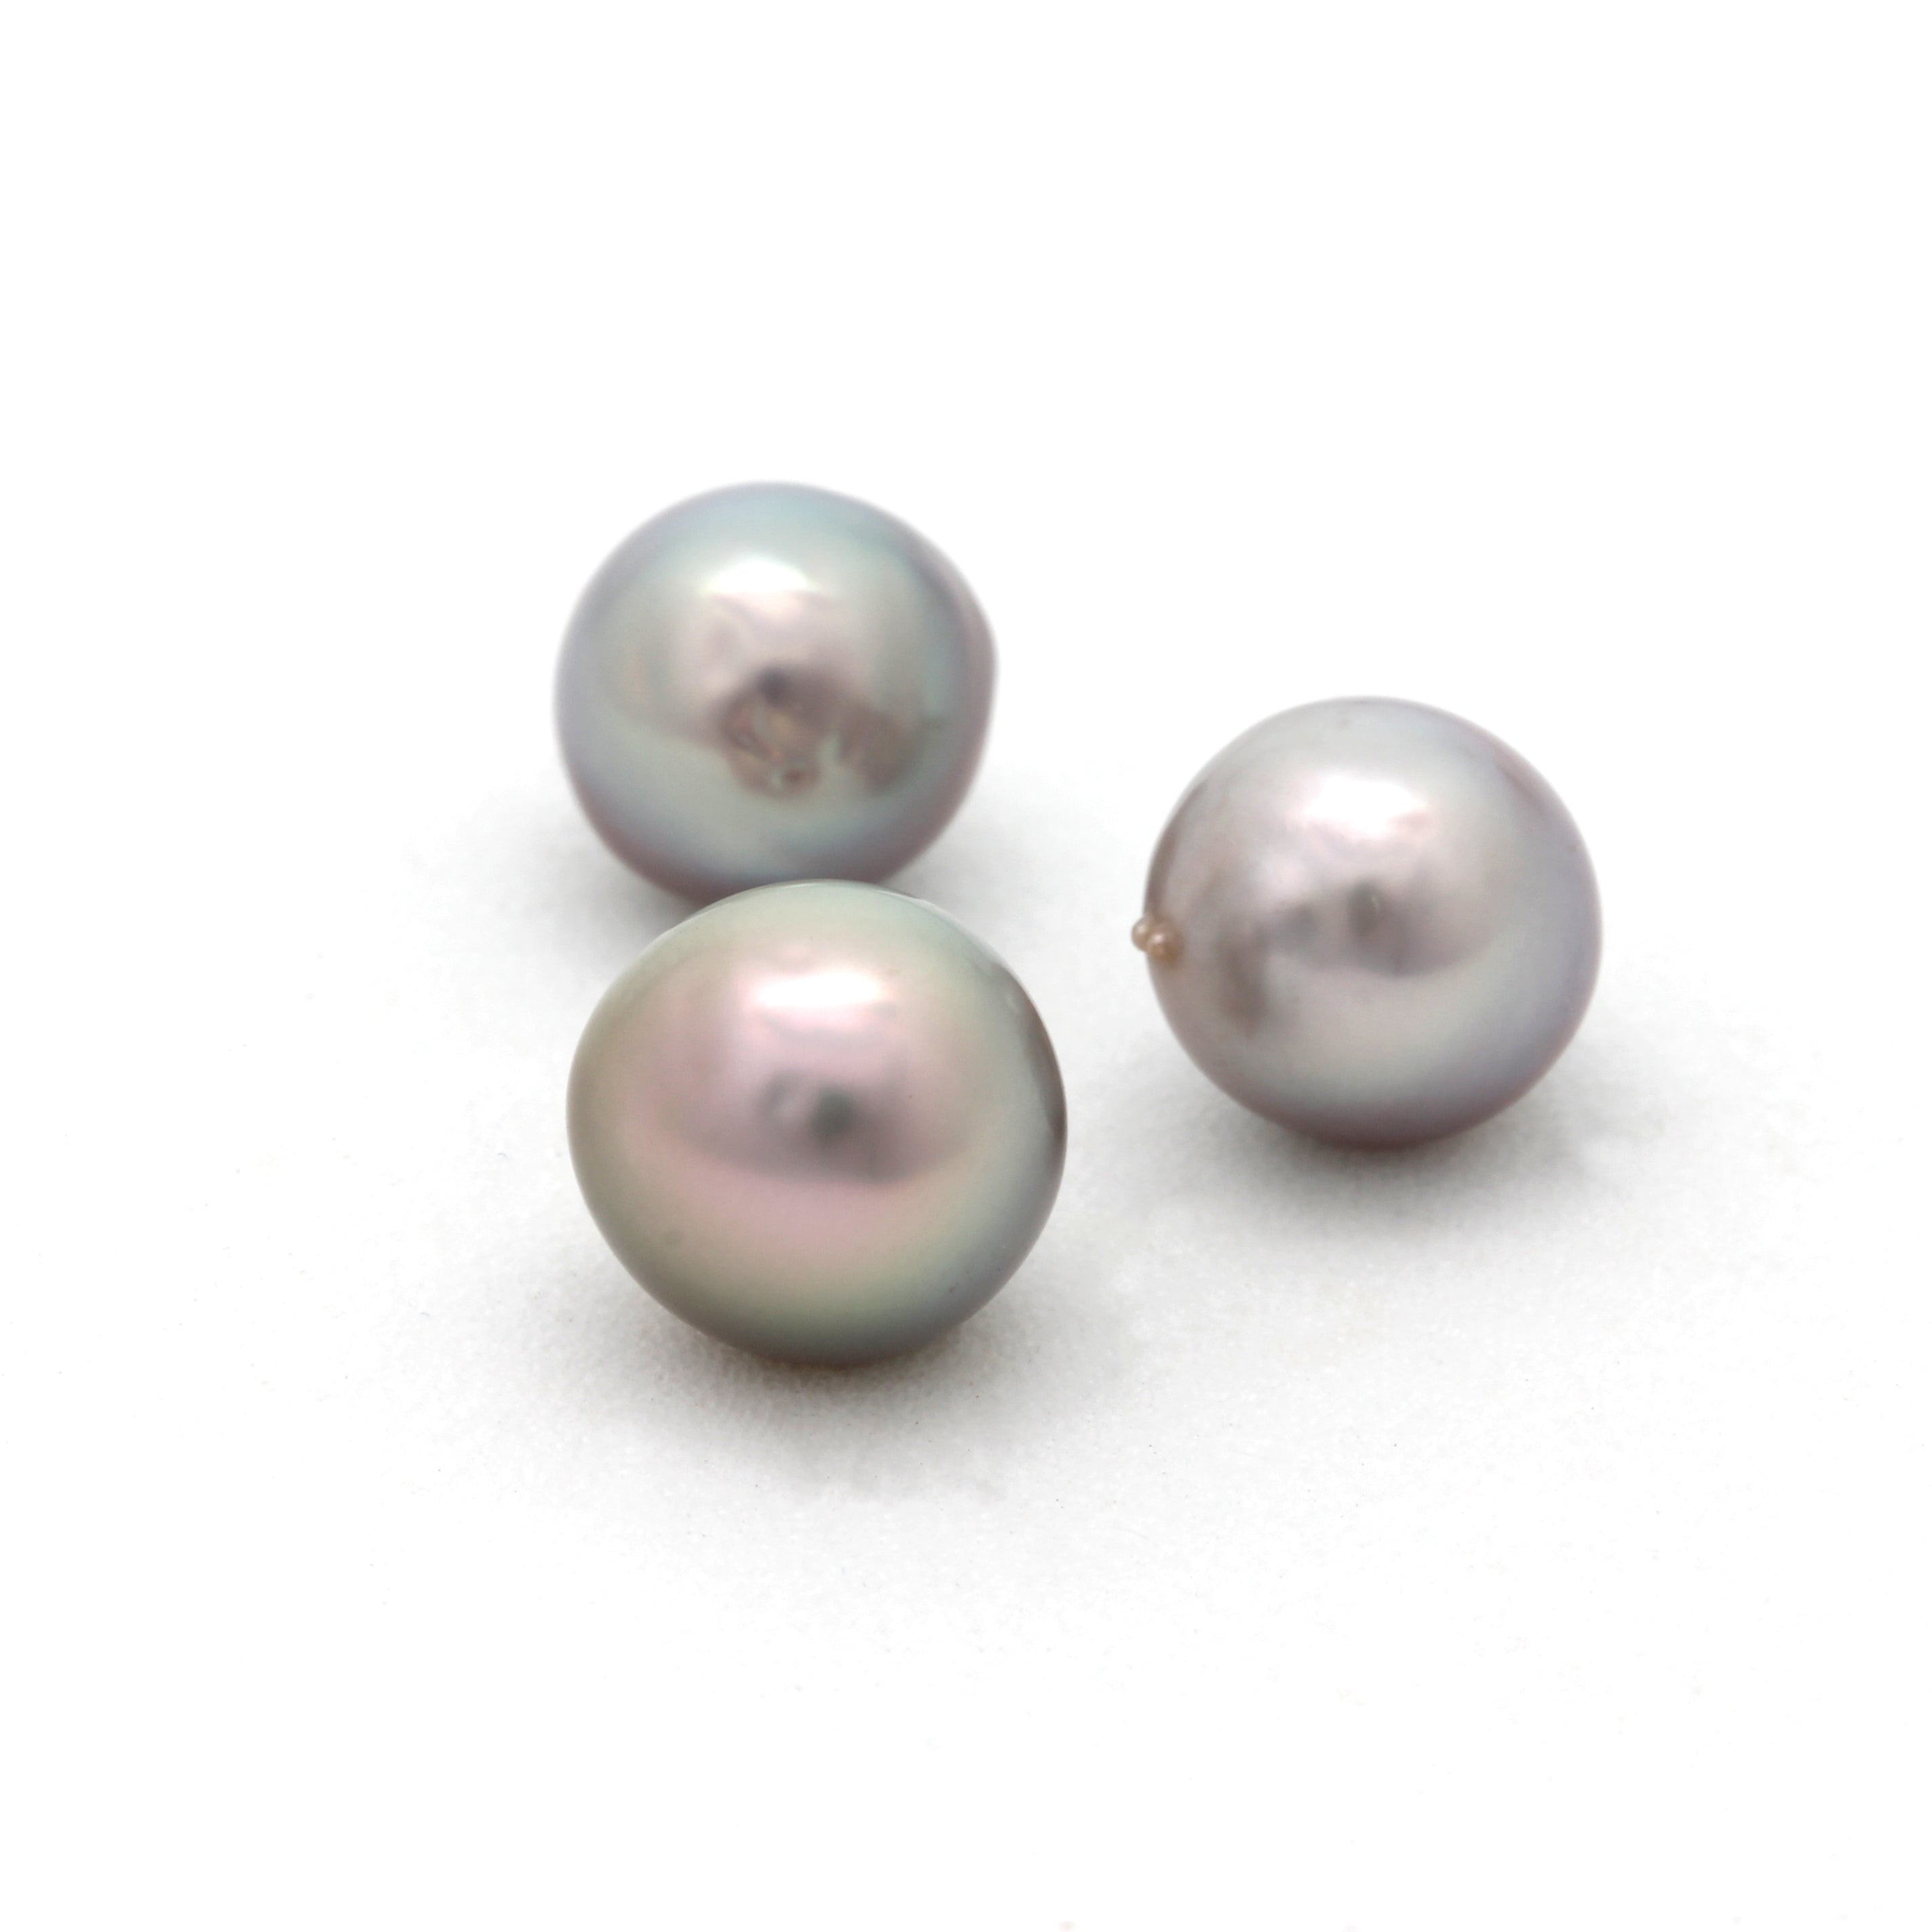 Lot of 3 Baroque Cortez Pearls from 2019 HARVEST